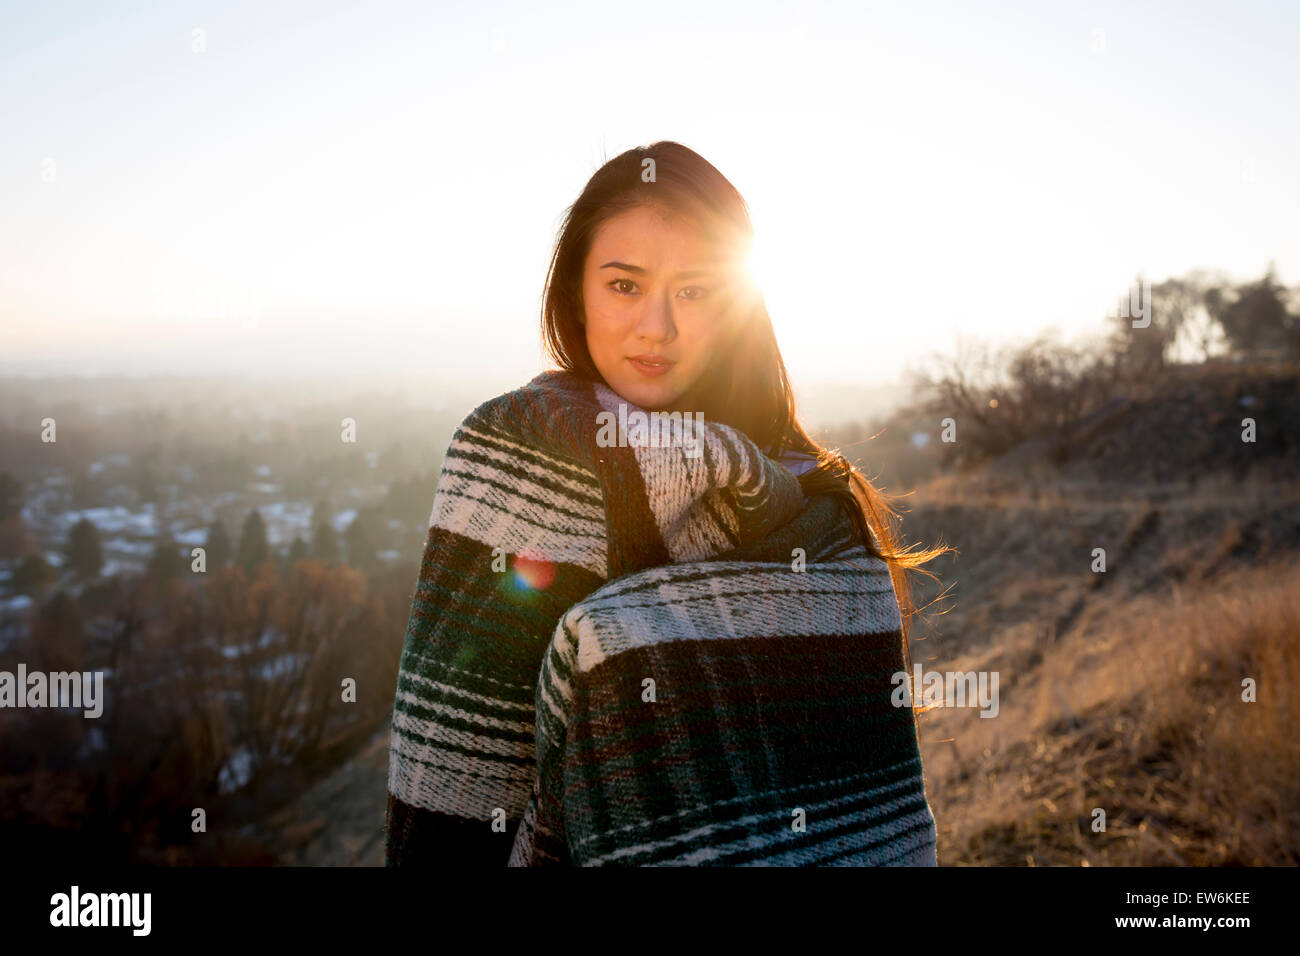 An Asian girl smiles wrapped in a blanket in a small town environment. Stock Photo